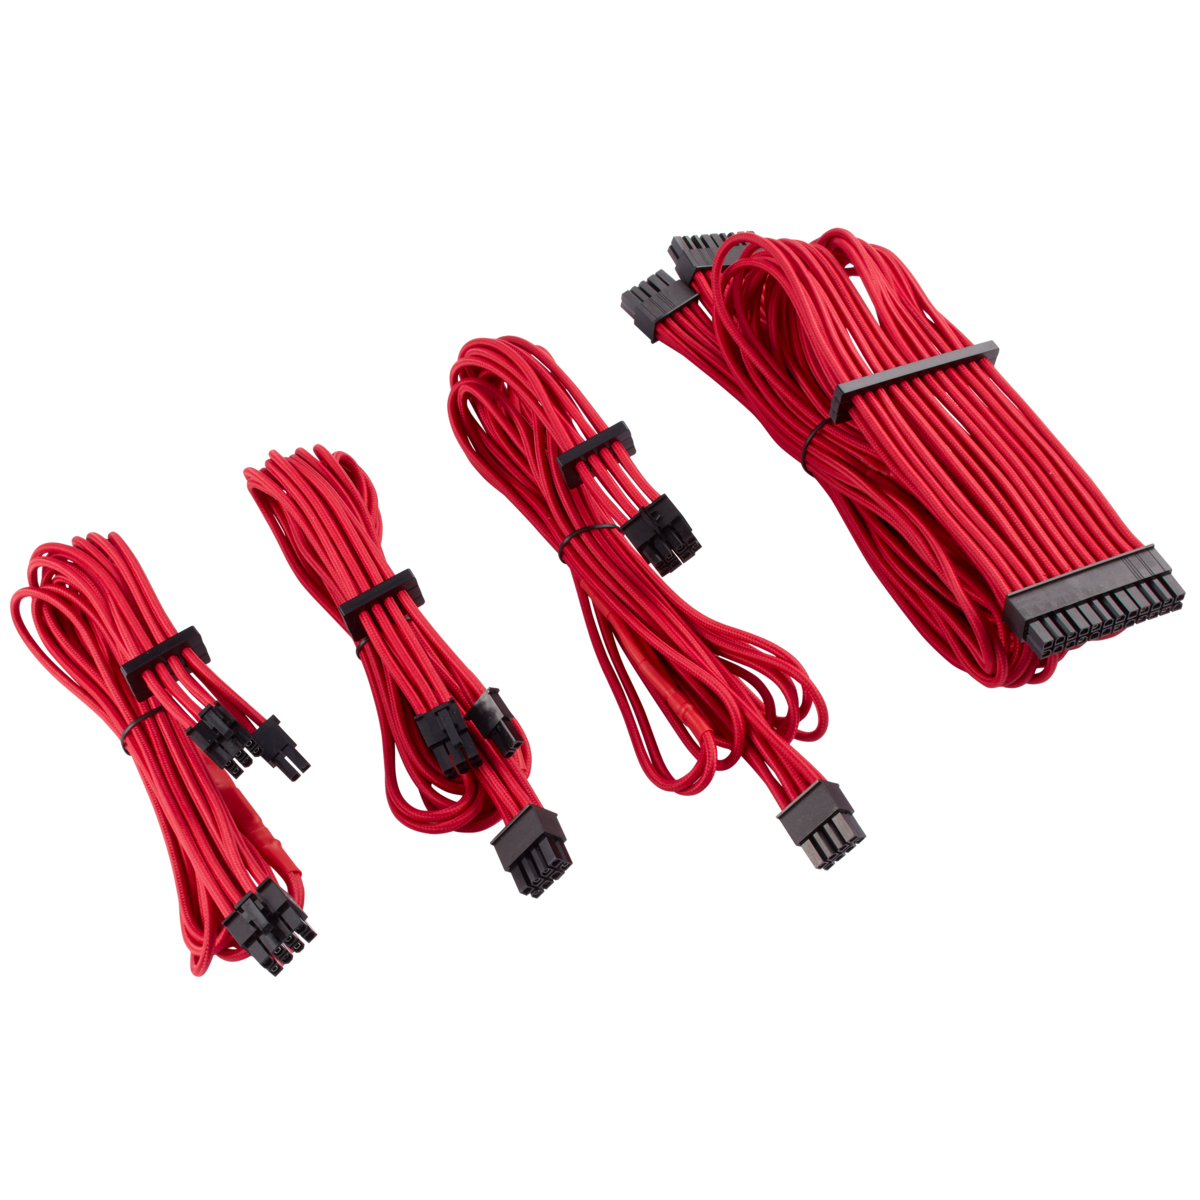 reagere Græsse pegefinger Corsair Individually Sleeved PSU Cables Starter Kit Type 4 Gen 4 Internal  Power Cable - Red